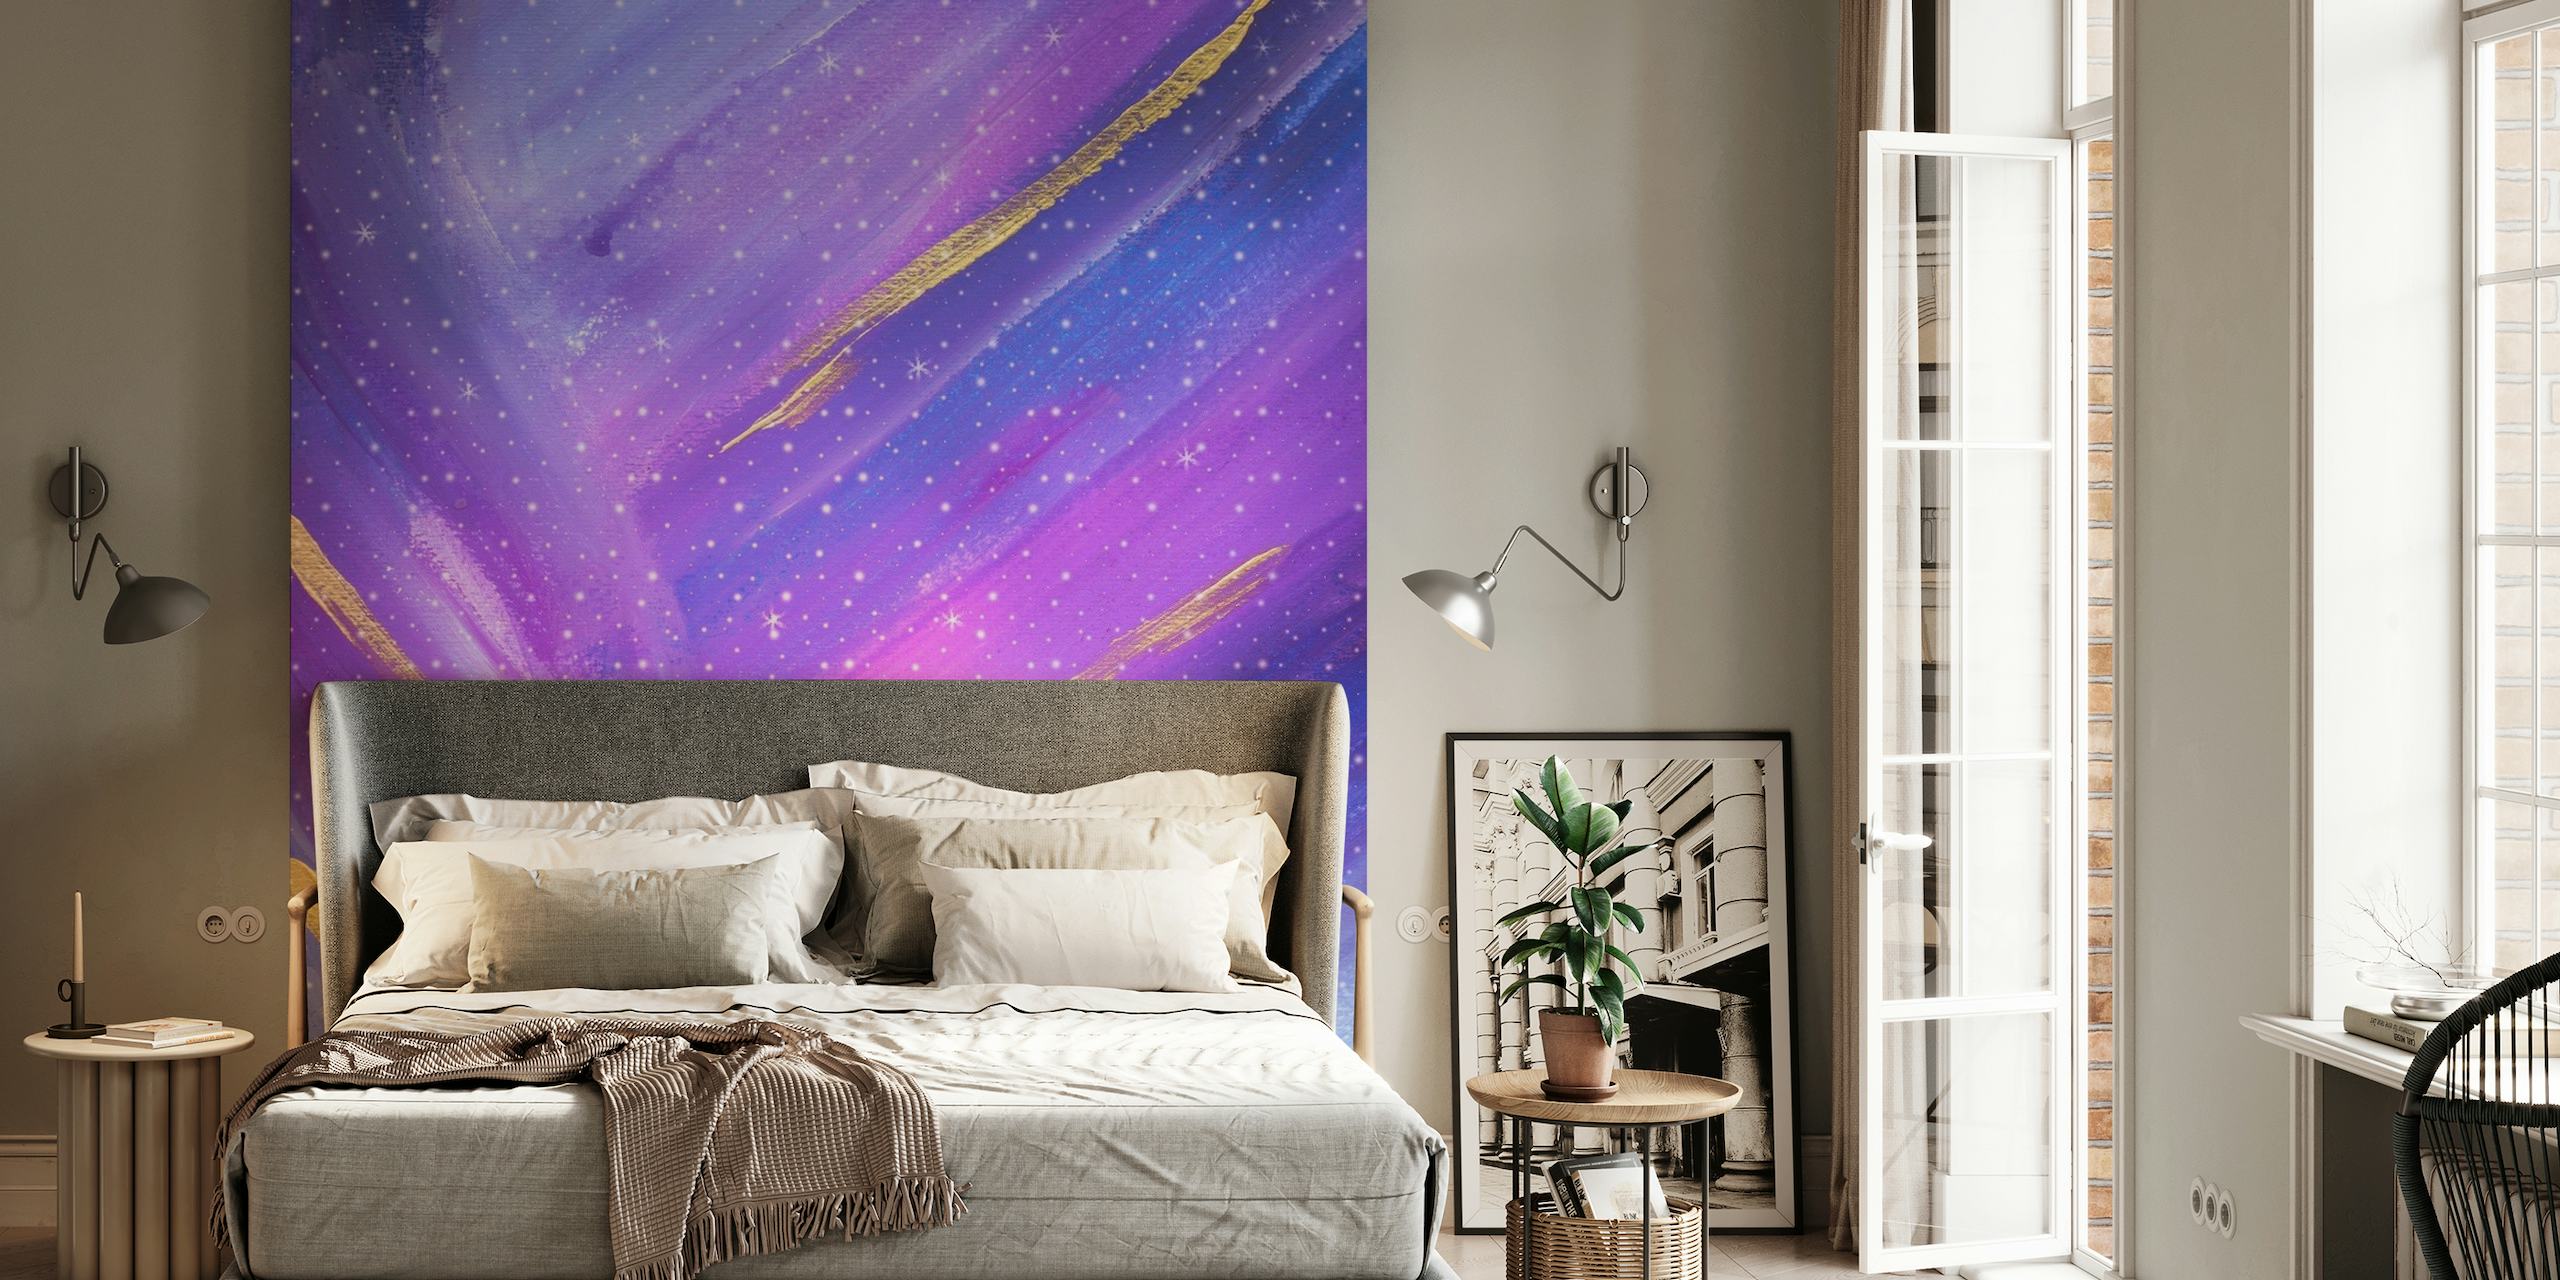 Abstract celestial nebula wall mural in purple and blue shades with golden accents